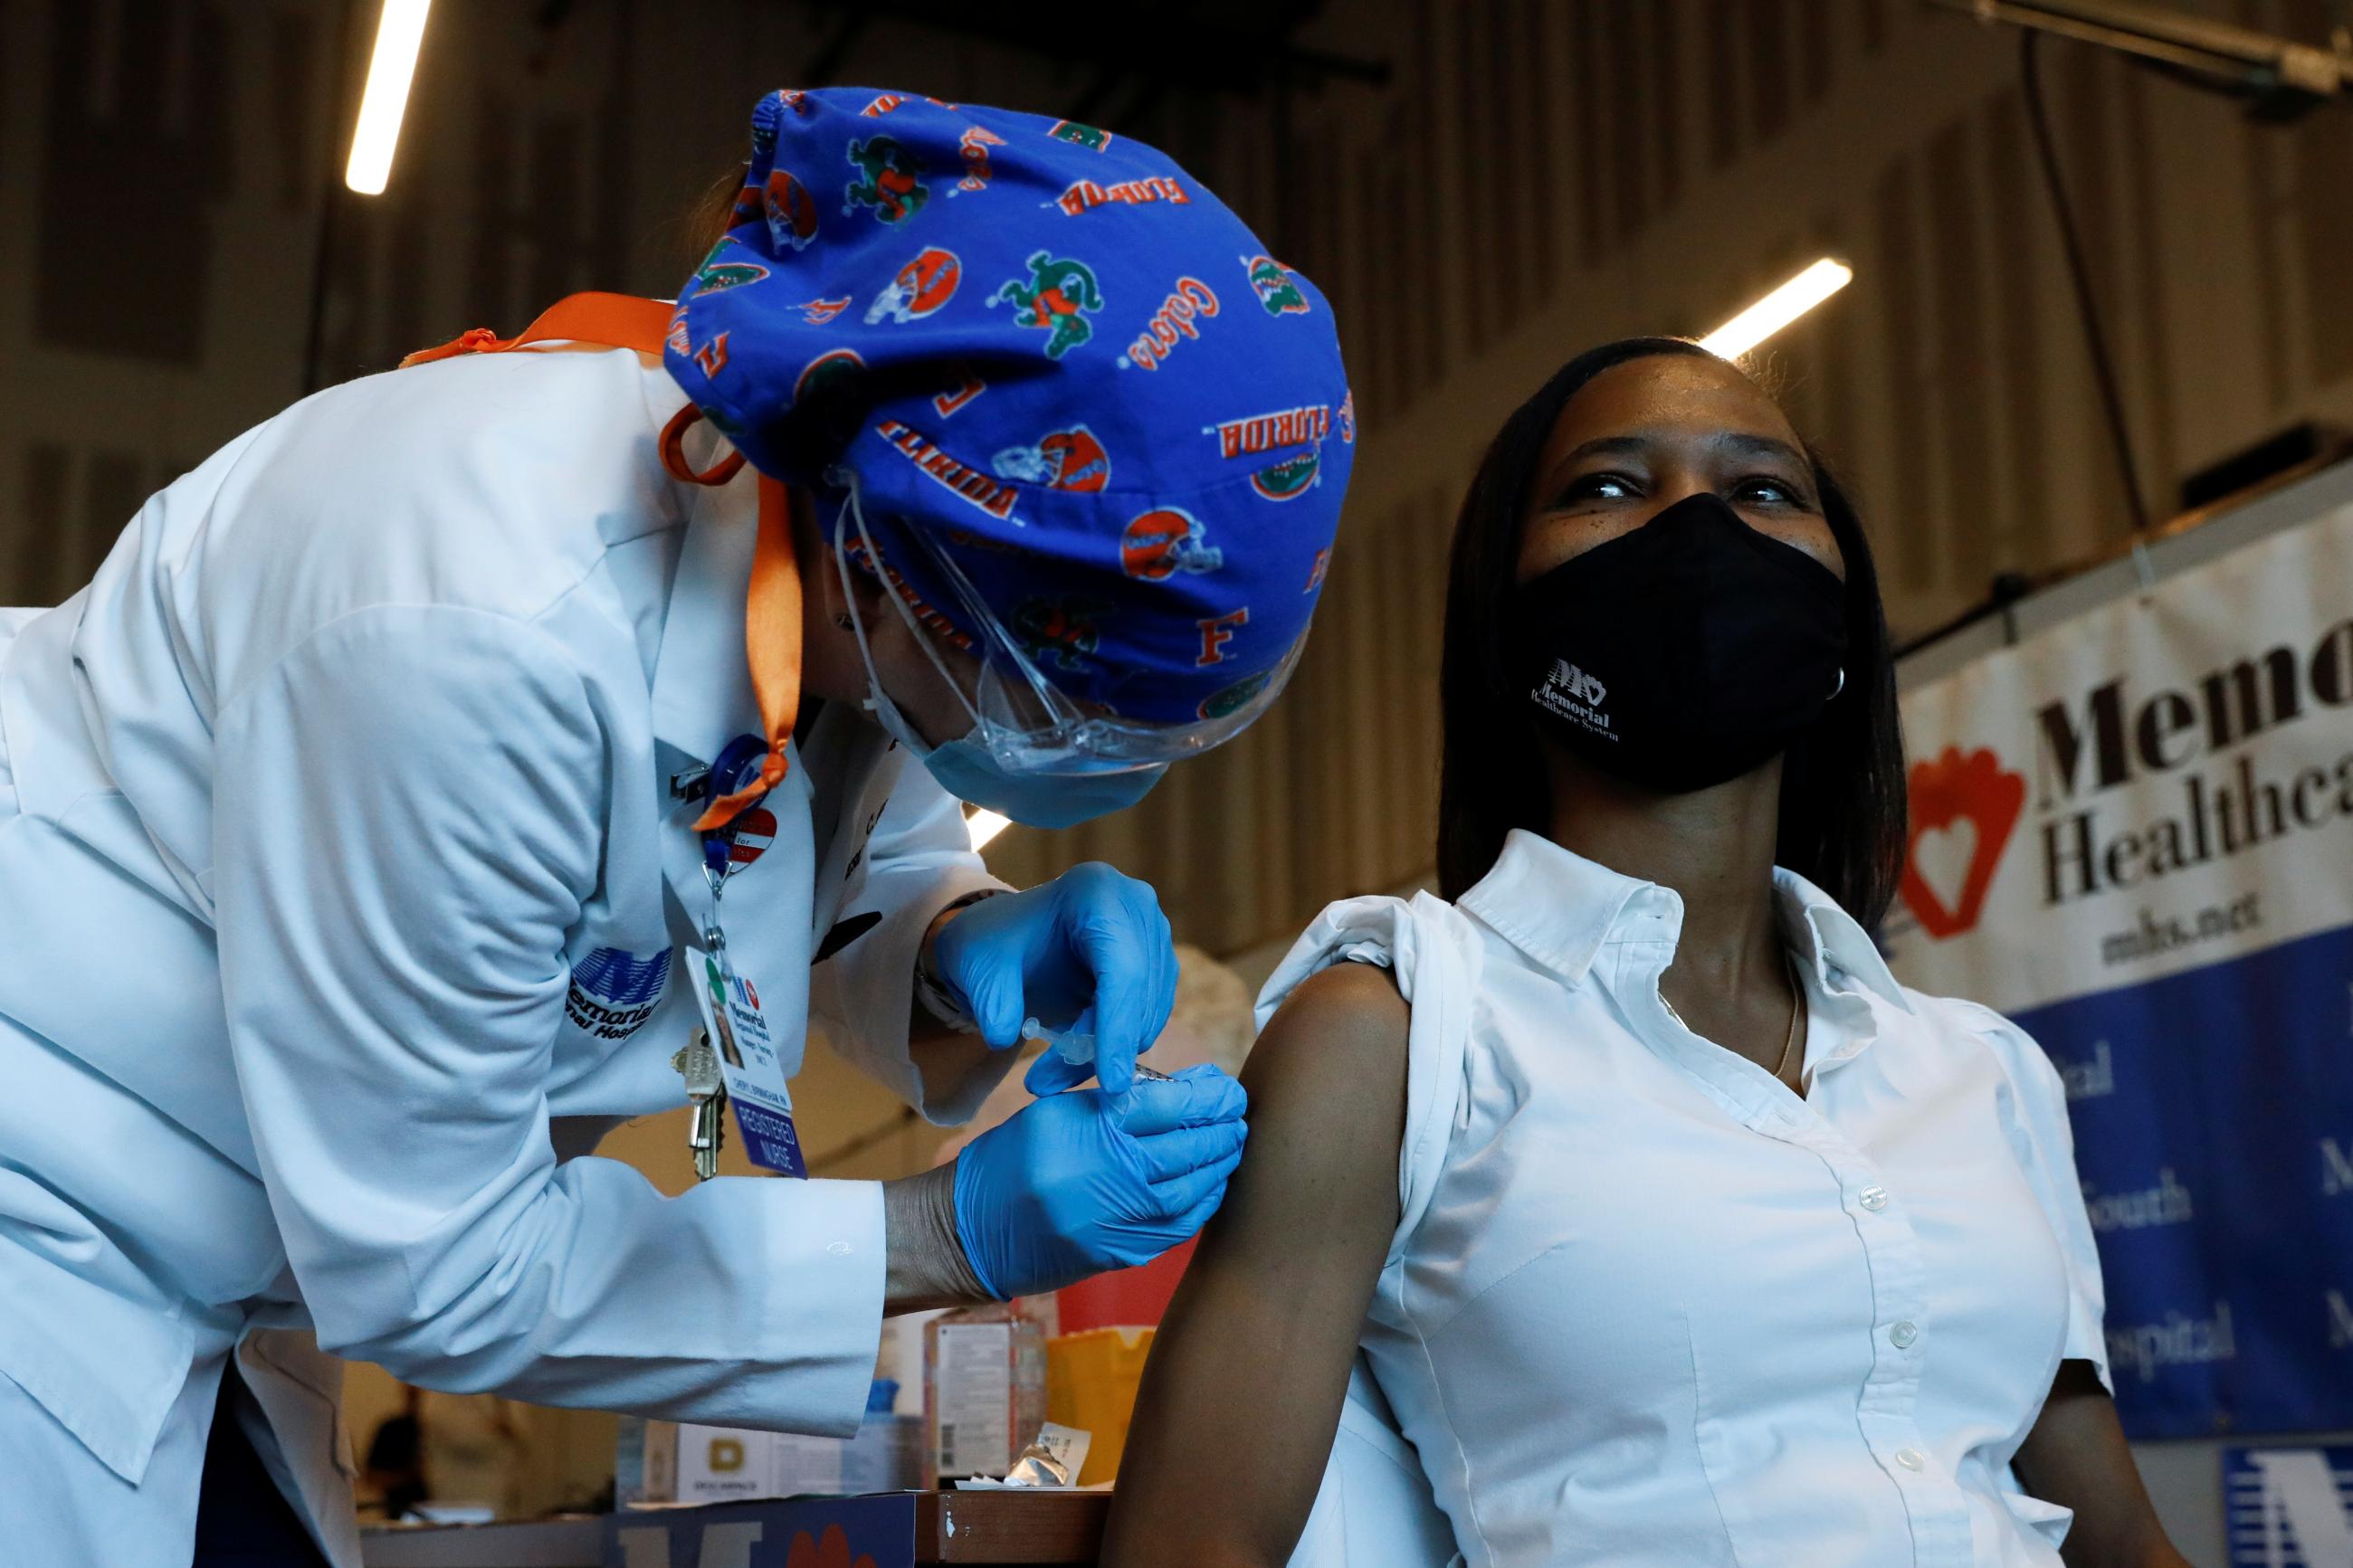 A nurse administers the Pfizer-BioNTech COVID-19 Vaccine to another registered nurse at Memorial Health-care System facility in Miramar, Florida on December 14, 2020.